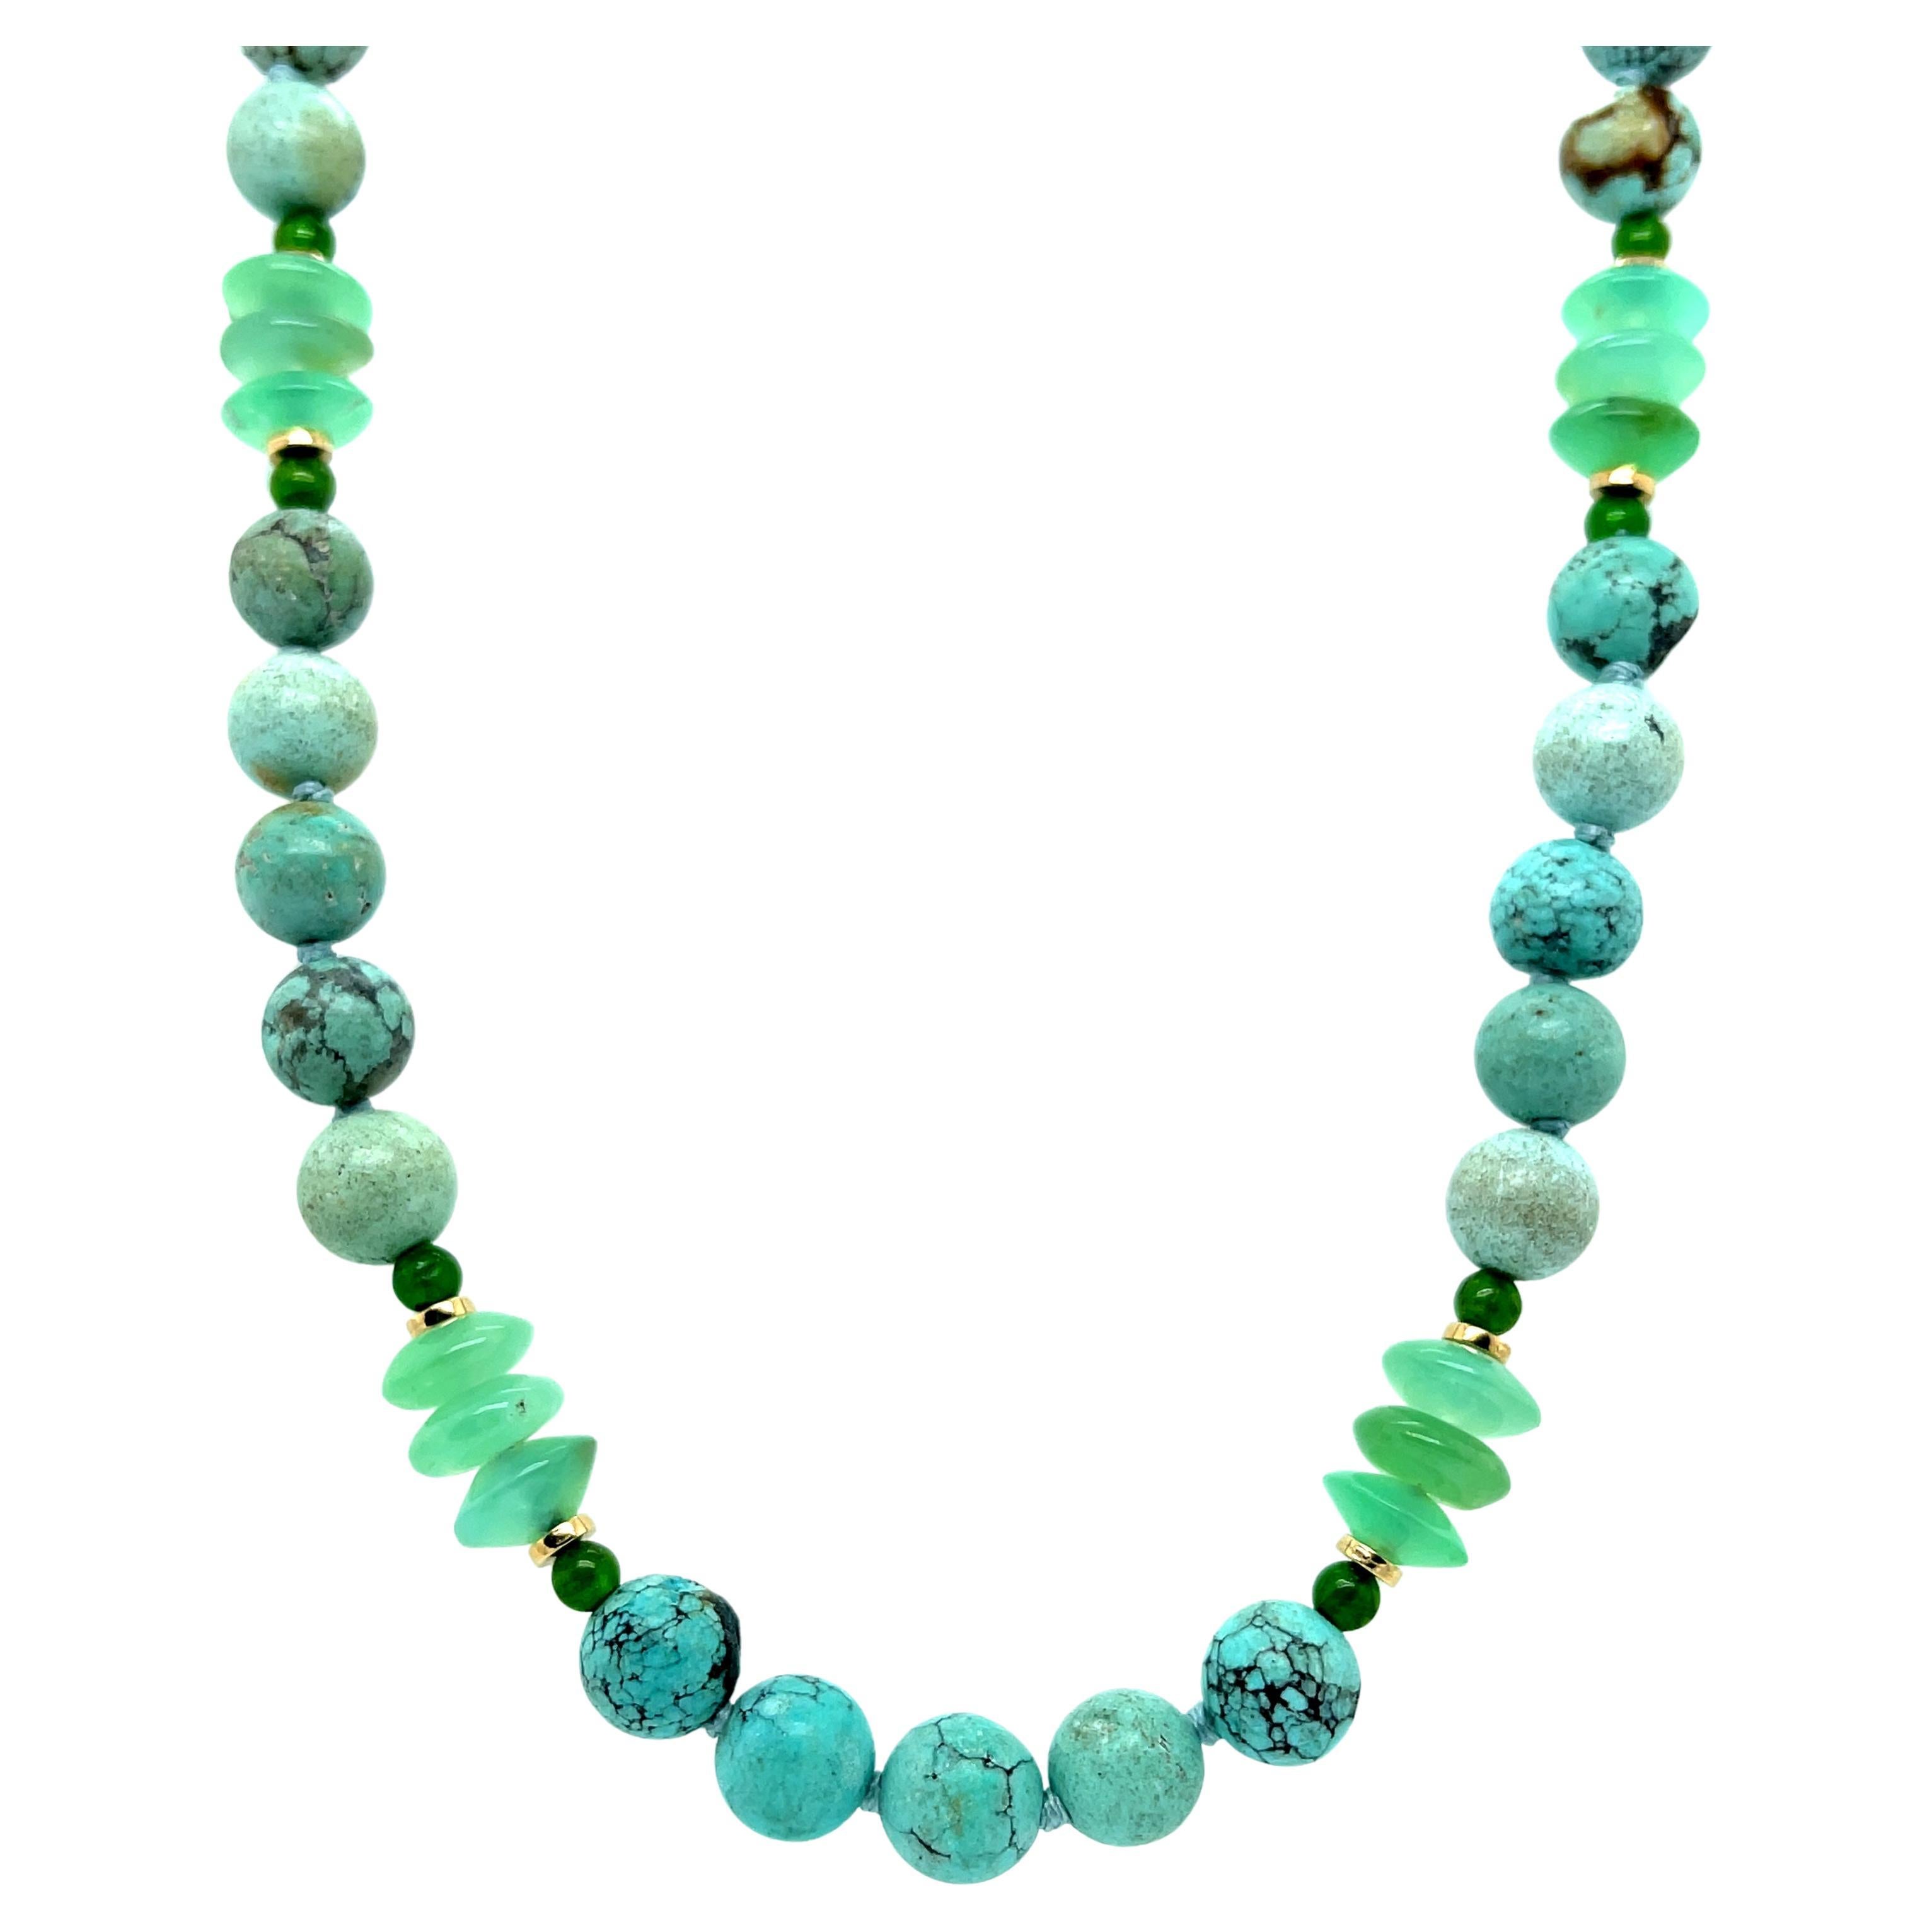 Turquoise, Chrome Diopside and Chrysoprase Necklace, 18 Inches